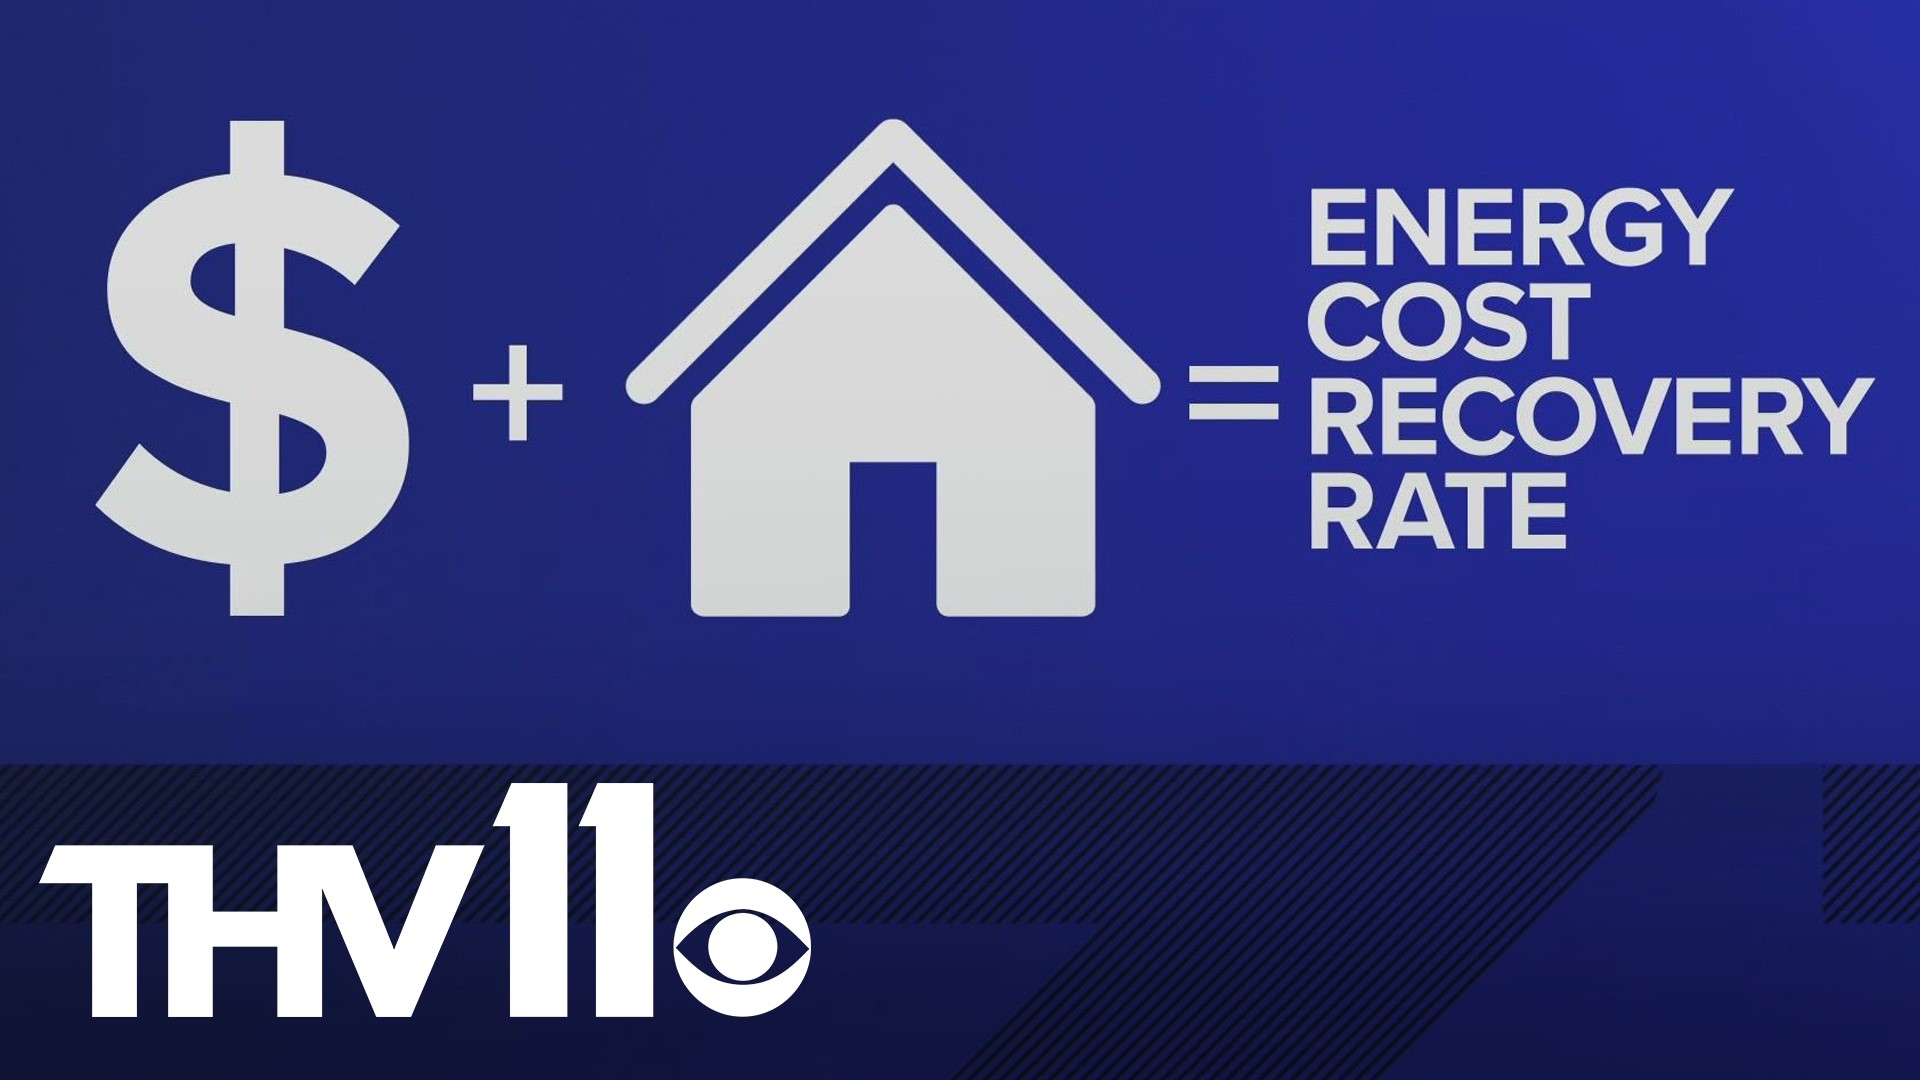 People can expect their electric bills to be higher because of the increase of natural gas prices.